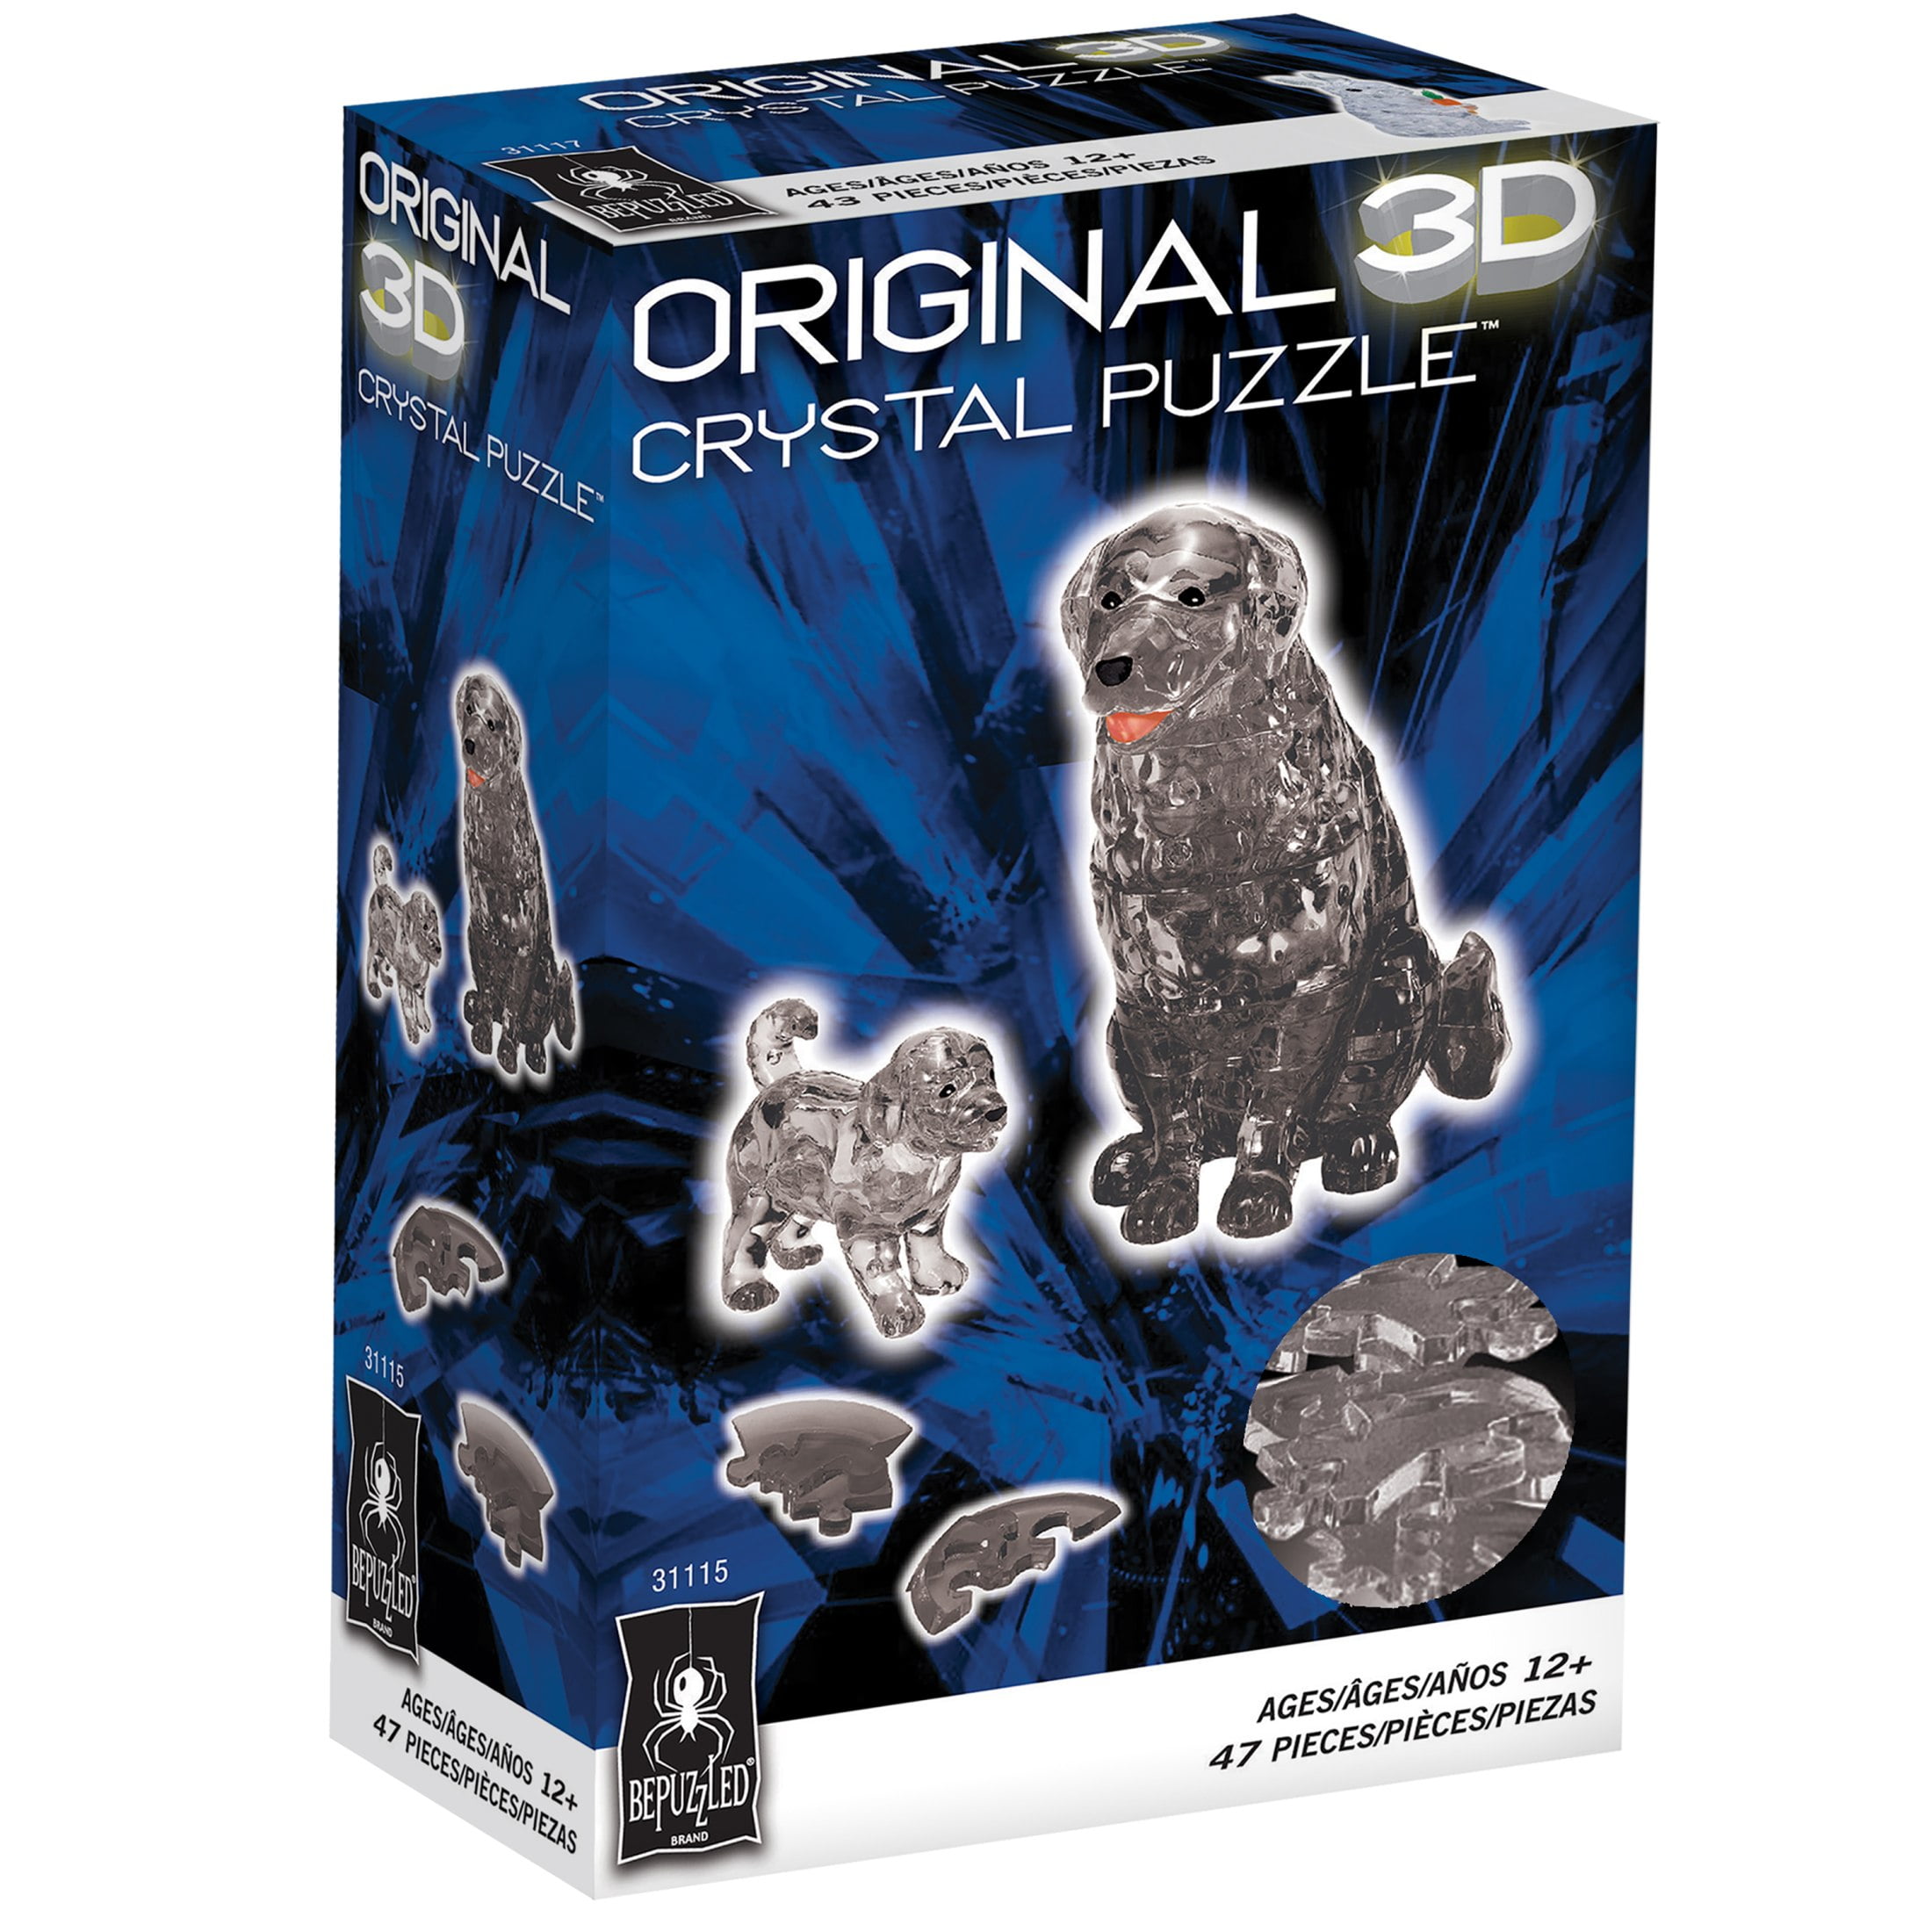 Bepuzzled Puppy Dog Jigsaw Puzzle on Steam